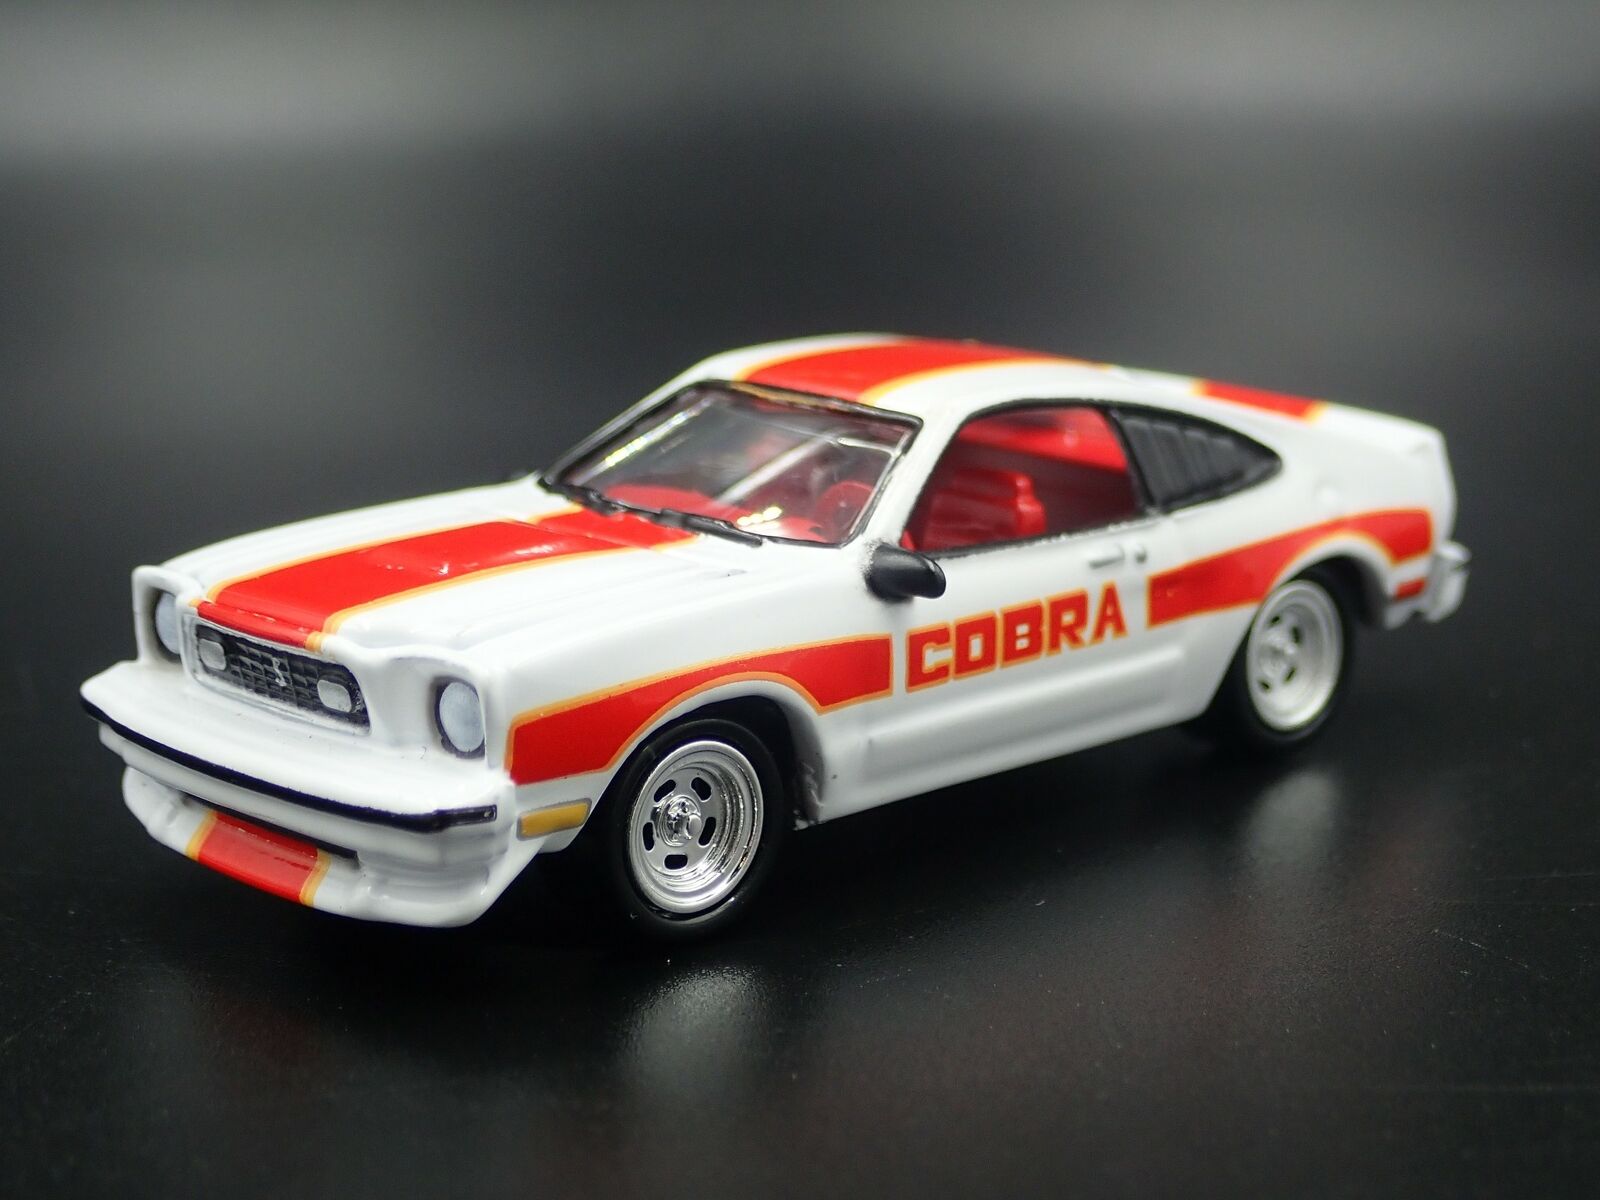 1978 78 FORD MUSTANG COBRA II 1:64 SCALE LIMITED COLLECTIBLE DIECAST MODEL CAR